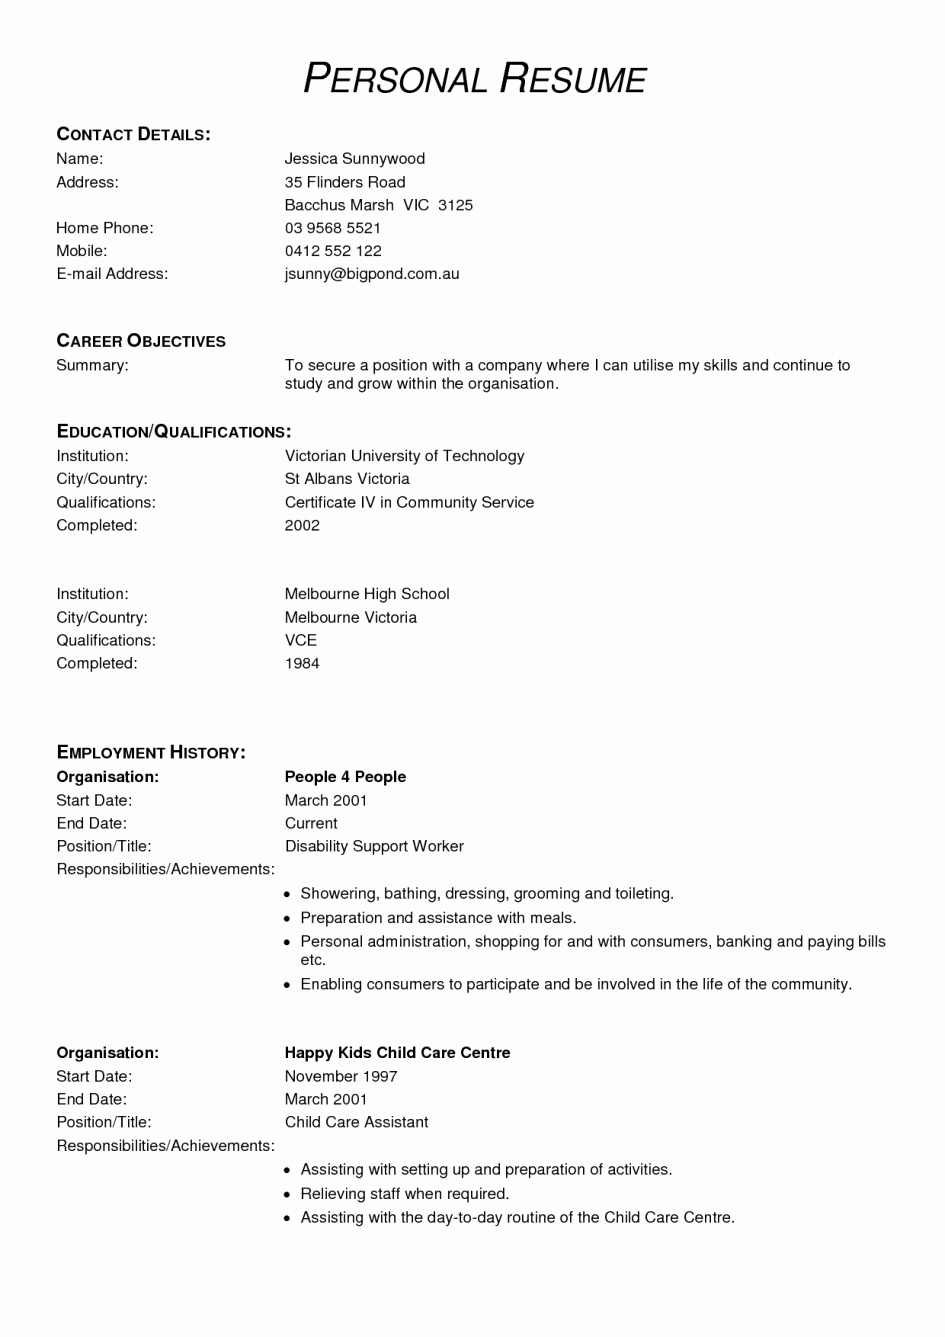 Resume Setup On Microsoft Word Inspirational Pin by Carrie Skouby On Resume Help